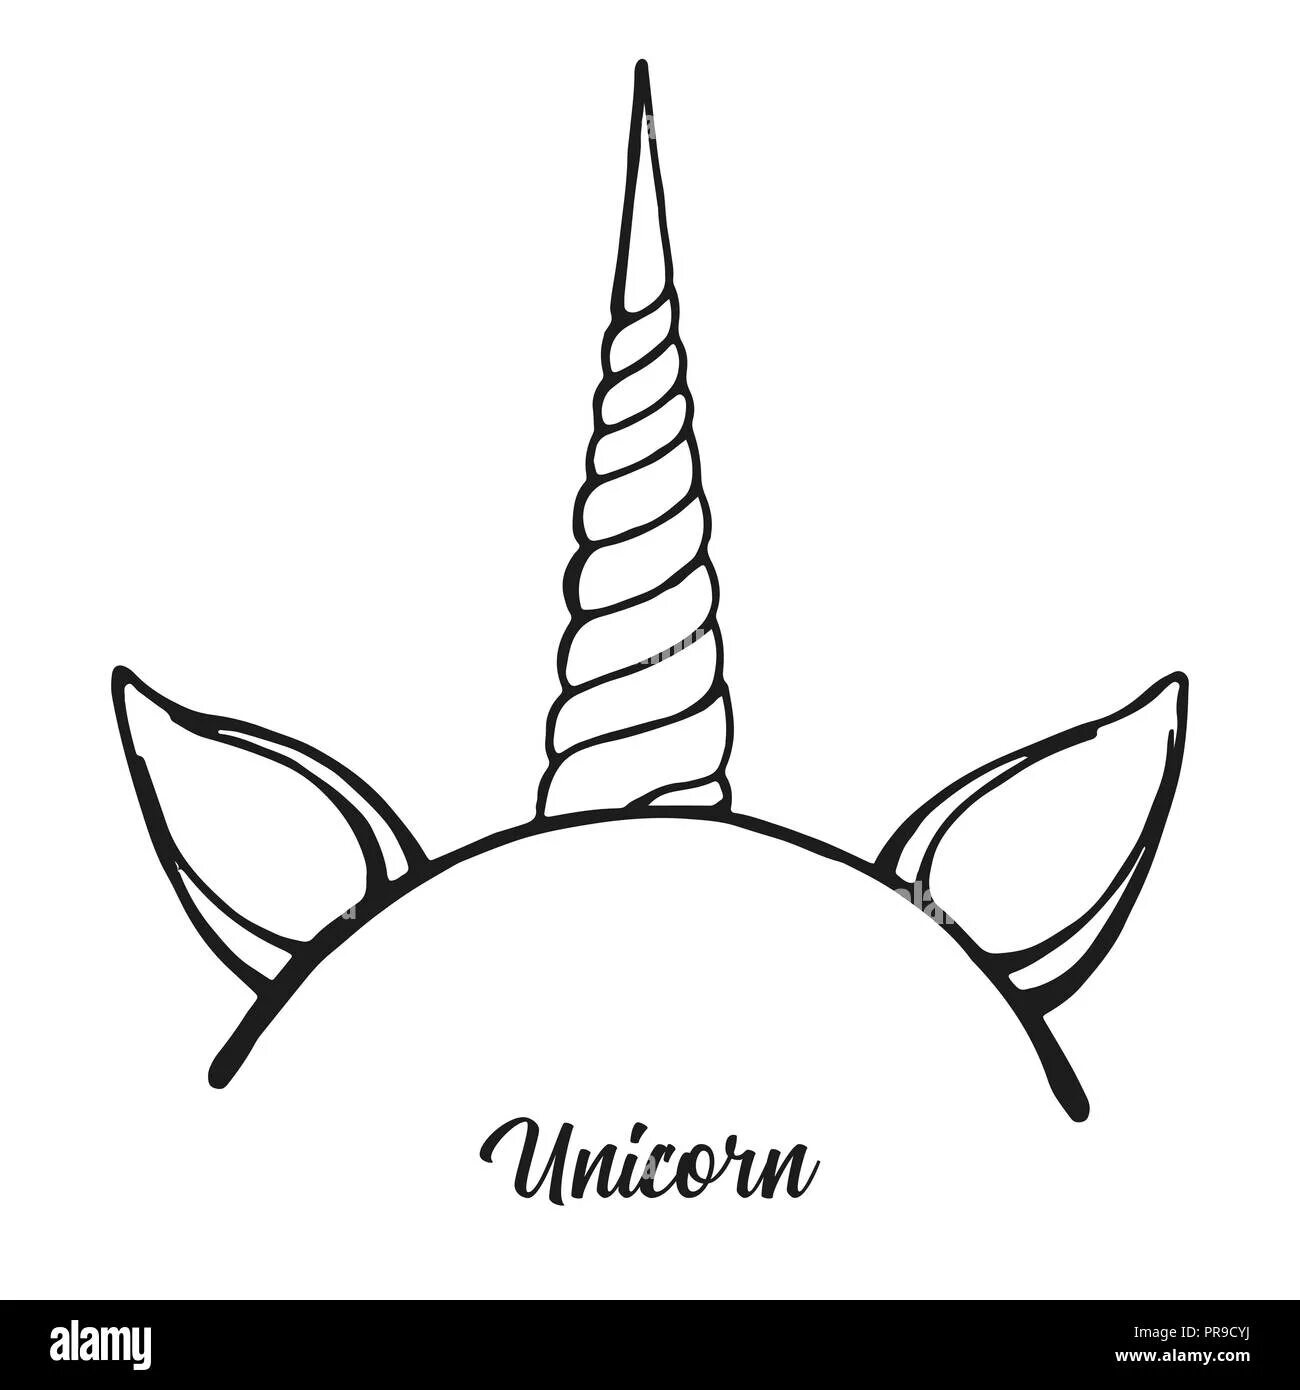 Sublime coloring page unicorn horn